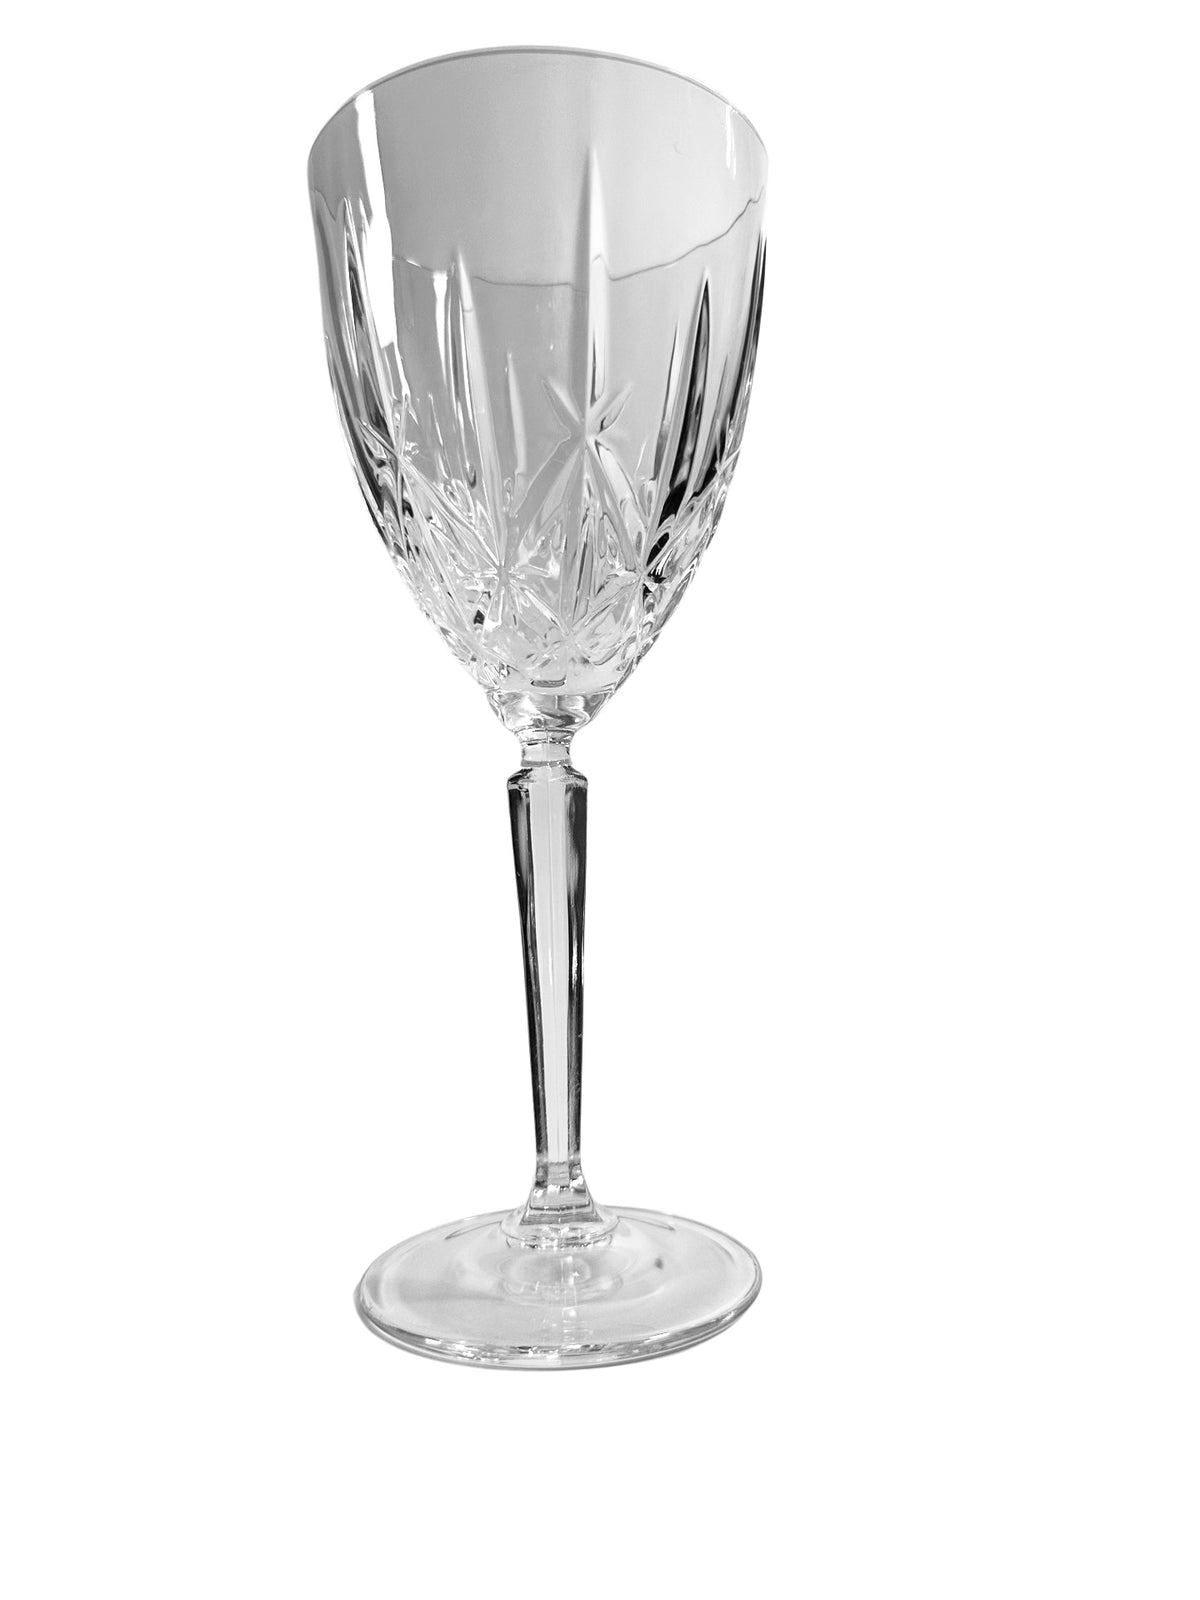 Marquis by Waterford Sparkle Wine Glass